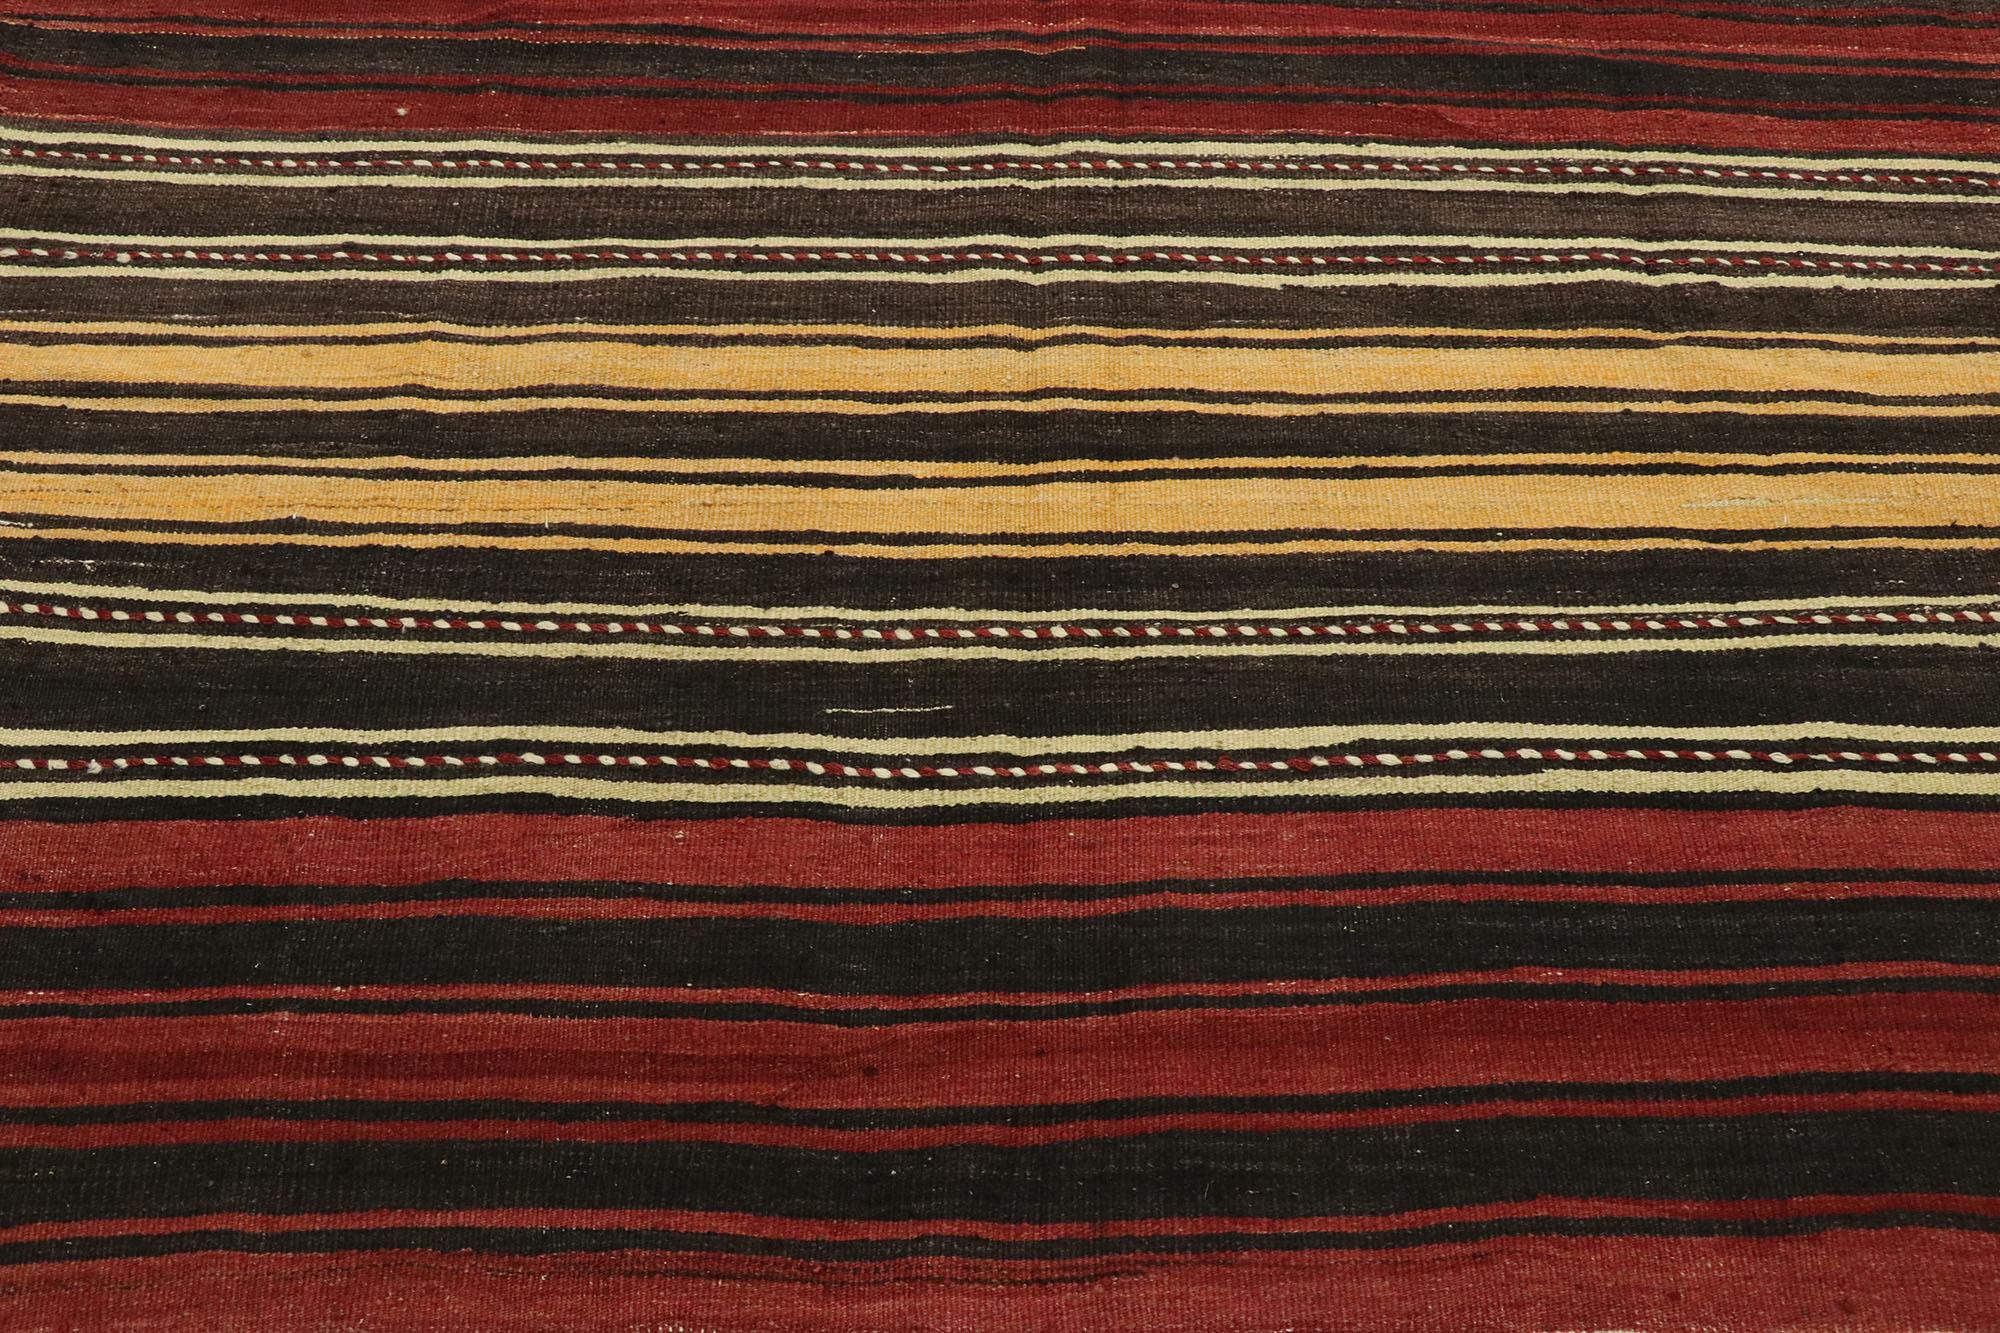 Vintage Turkish Striped Kilim Rug with Modern Cabin Style In Good Condition For Sale In Dallas, TX